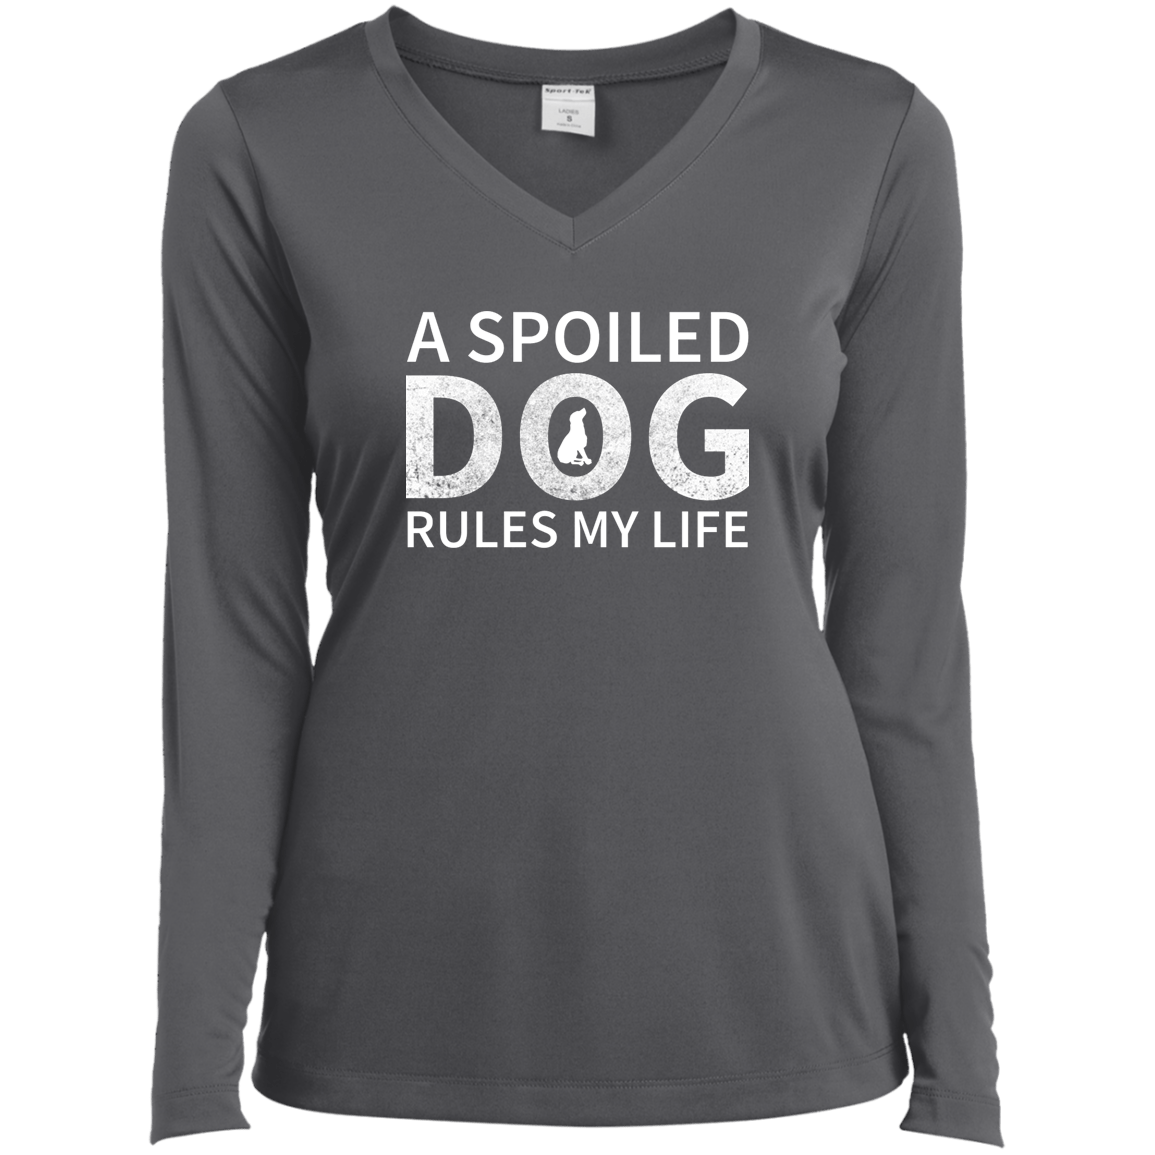 A Spoiled Dog Rules My Life - Long Sleeve Ladies V Neck.